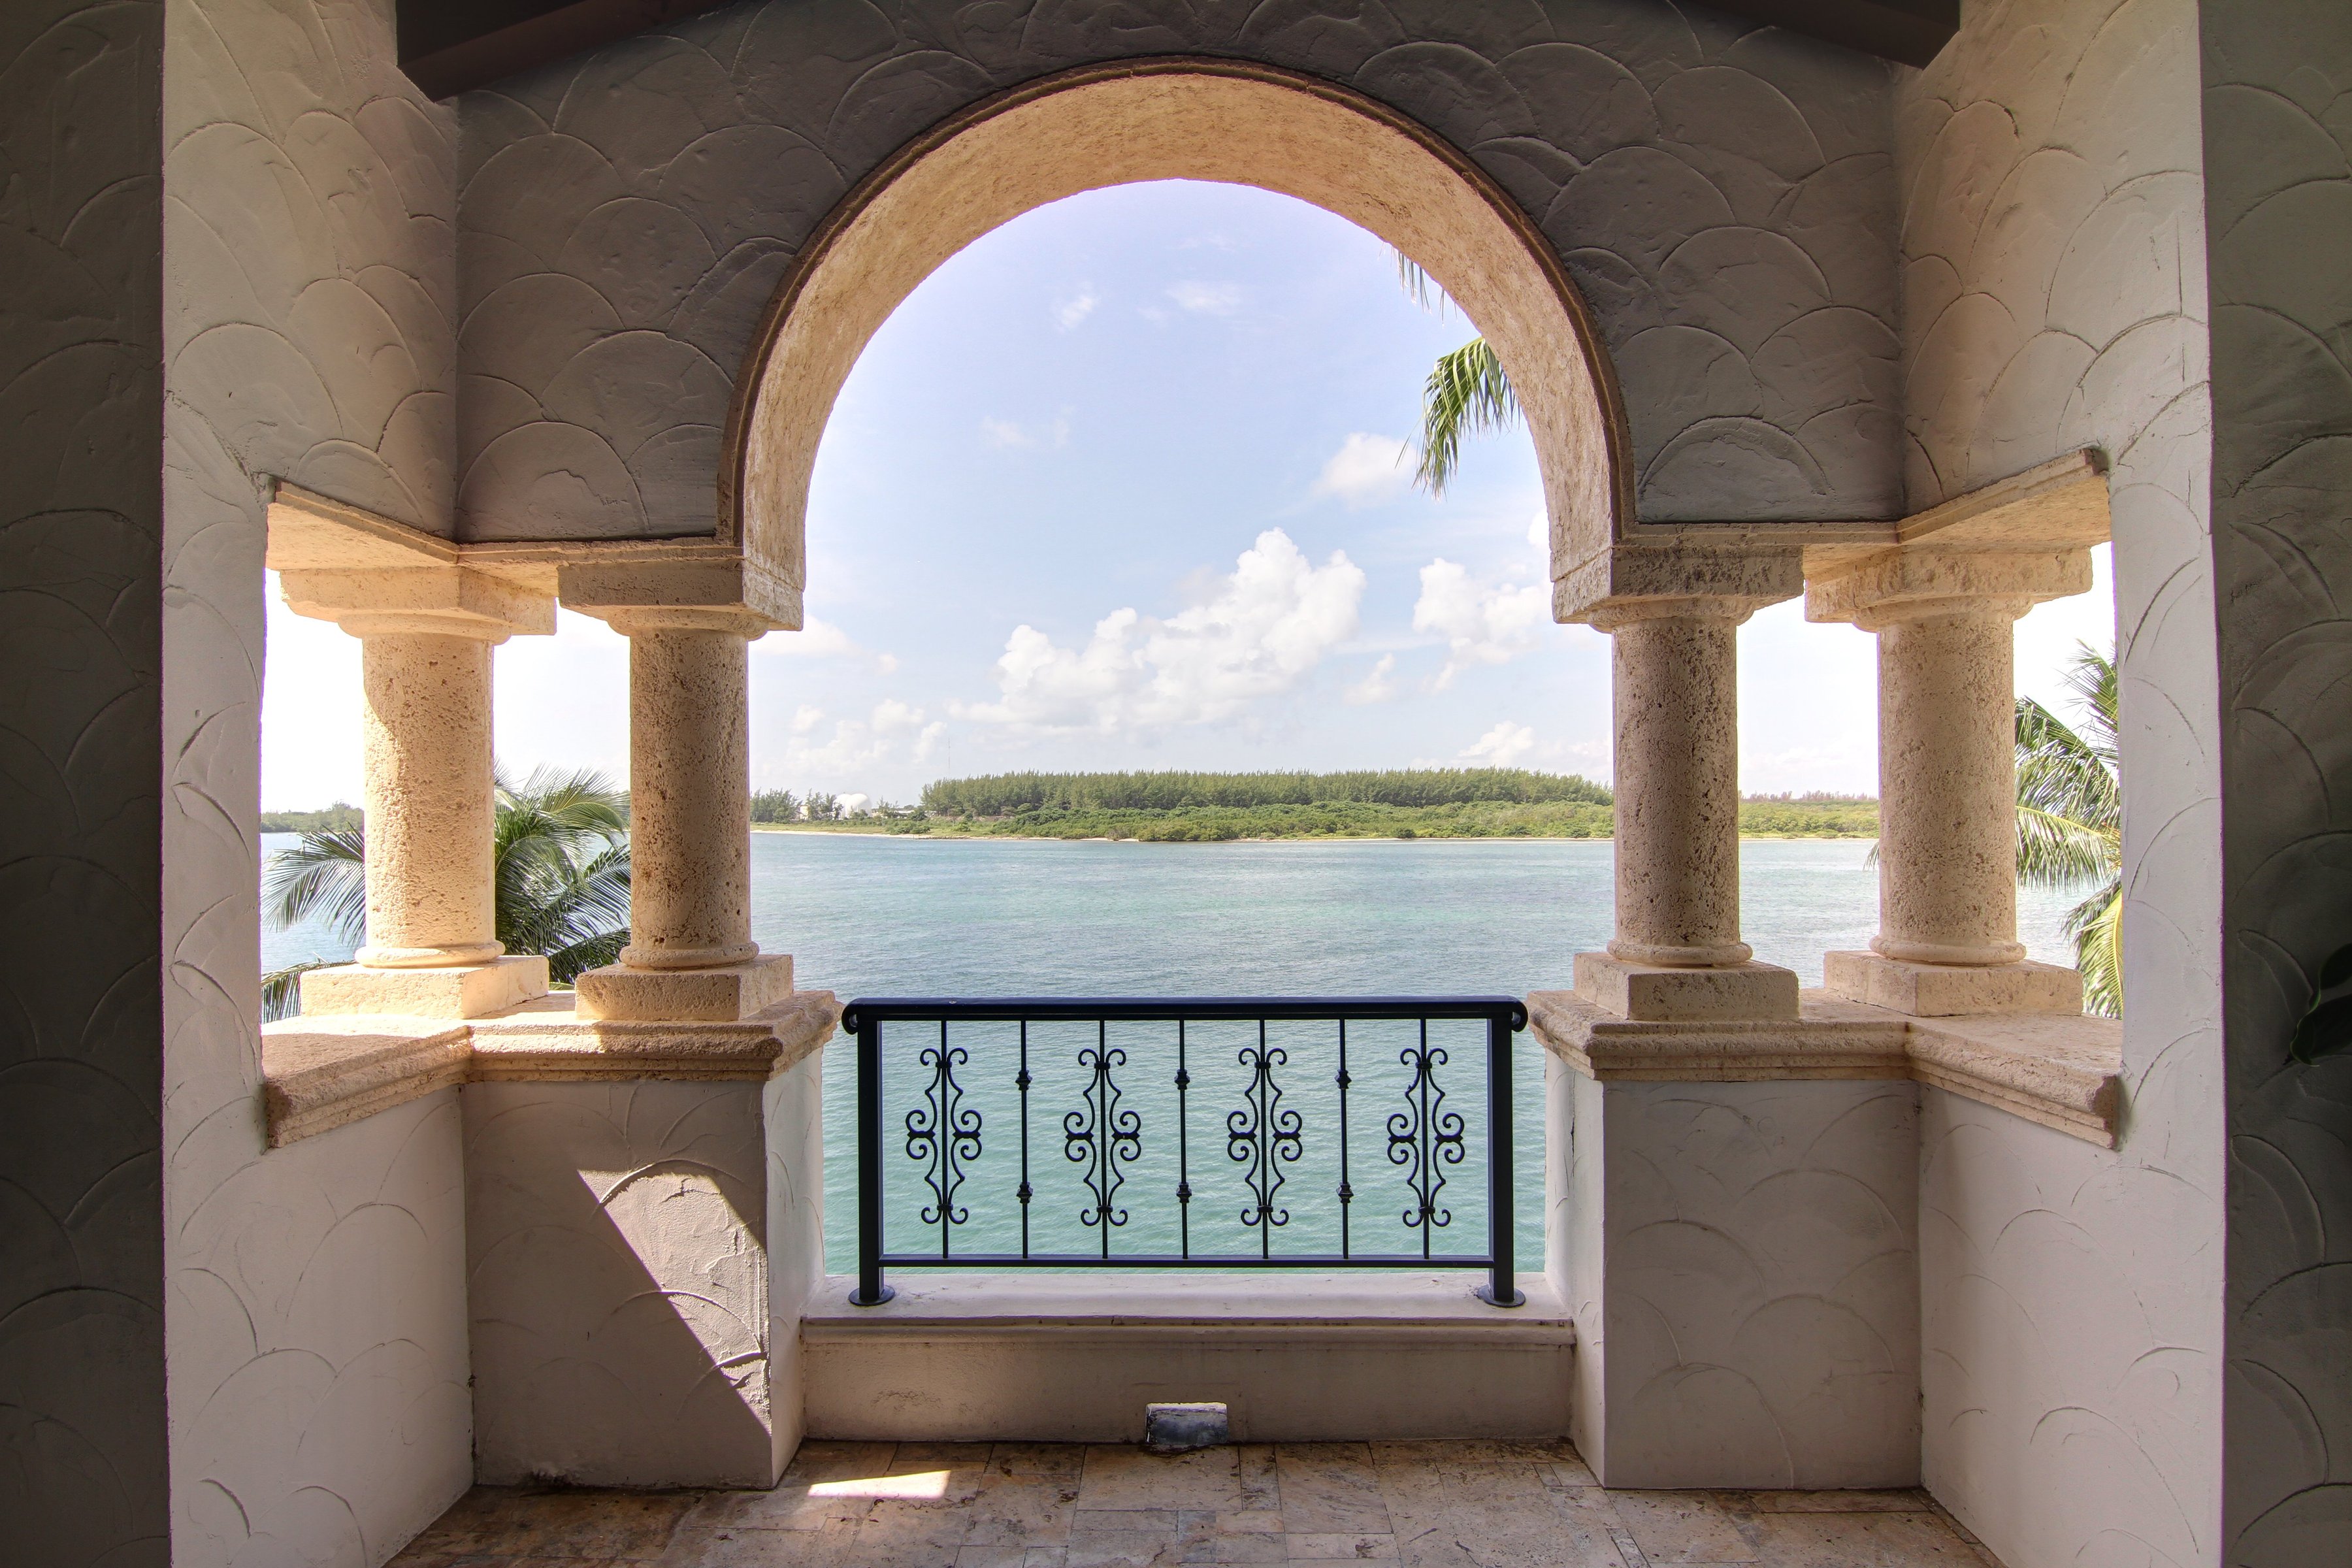 Bay view from a mediterranean style terrace on Fisher Island.